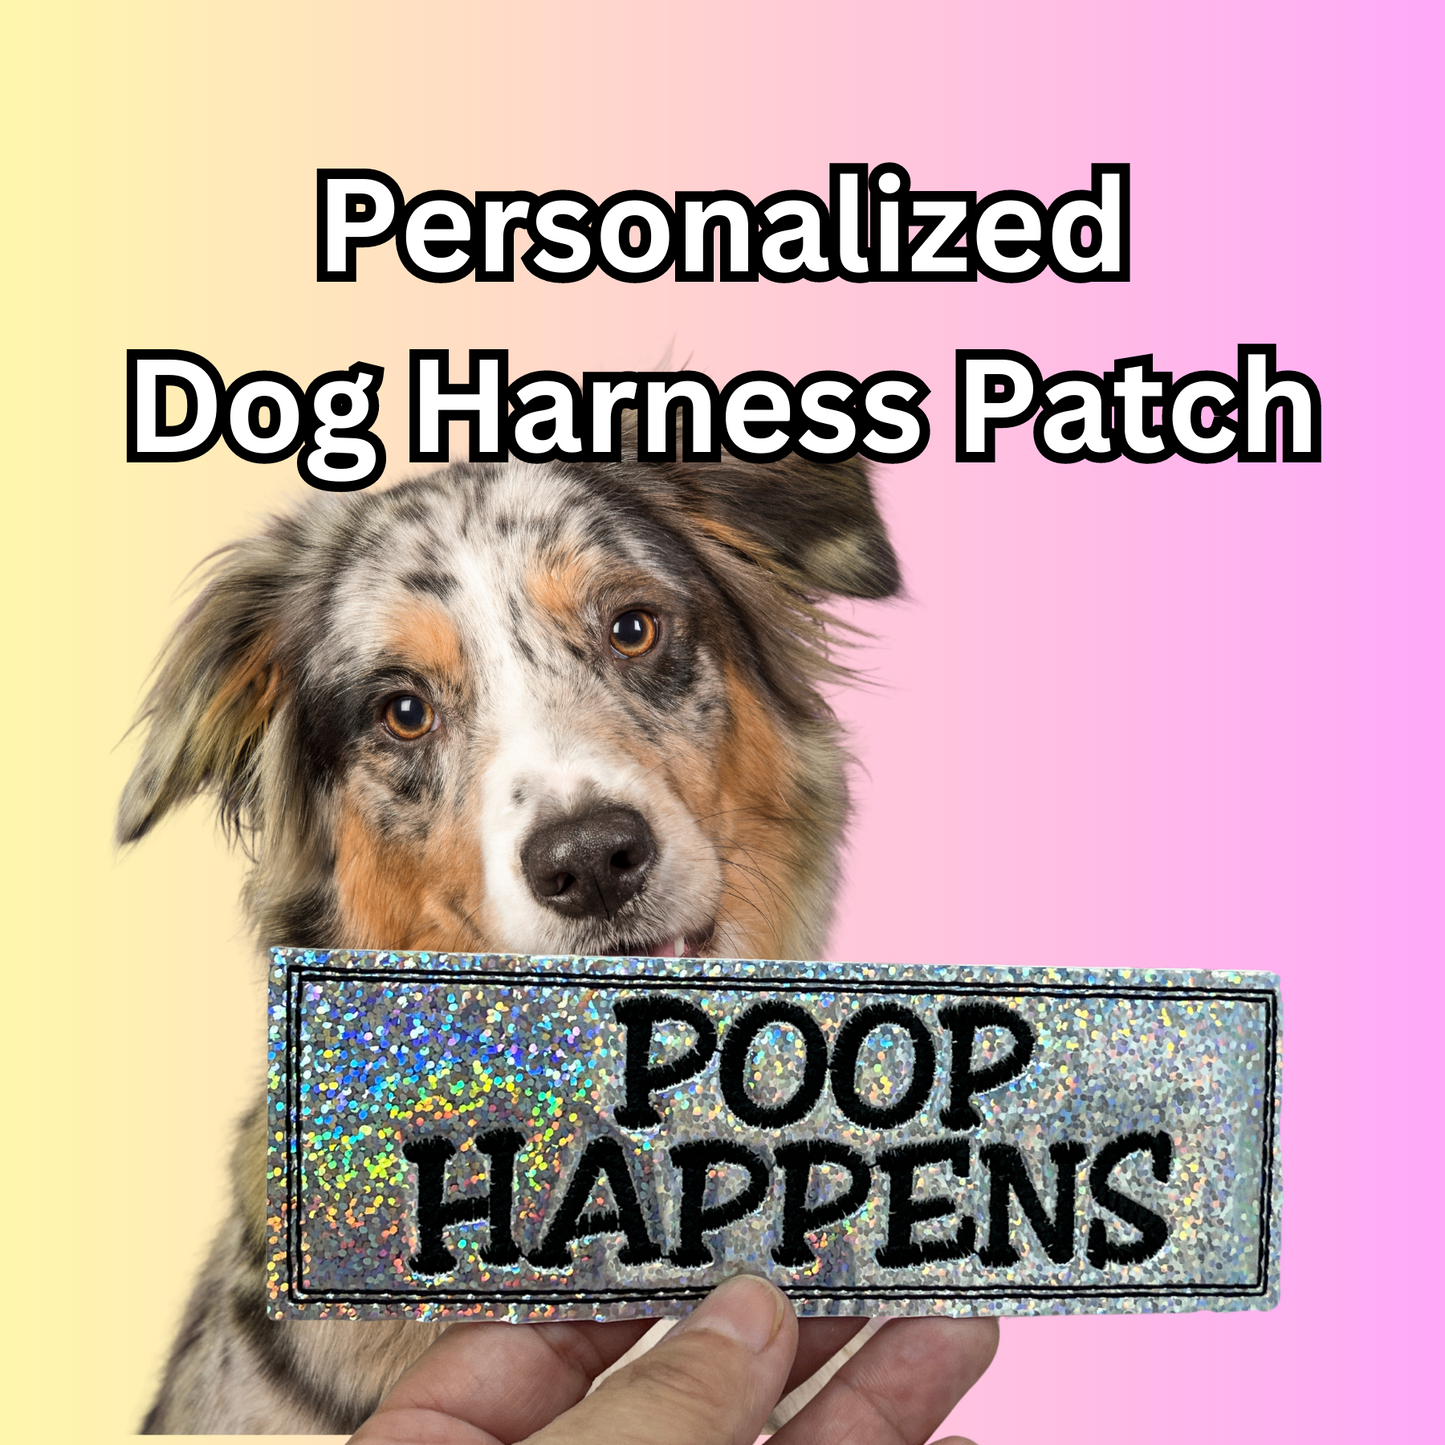 Personalized Embroidered Holographic Glitter Dog Harness Patches Velcro Backing